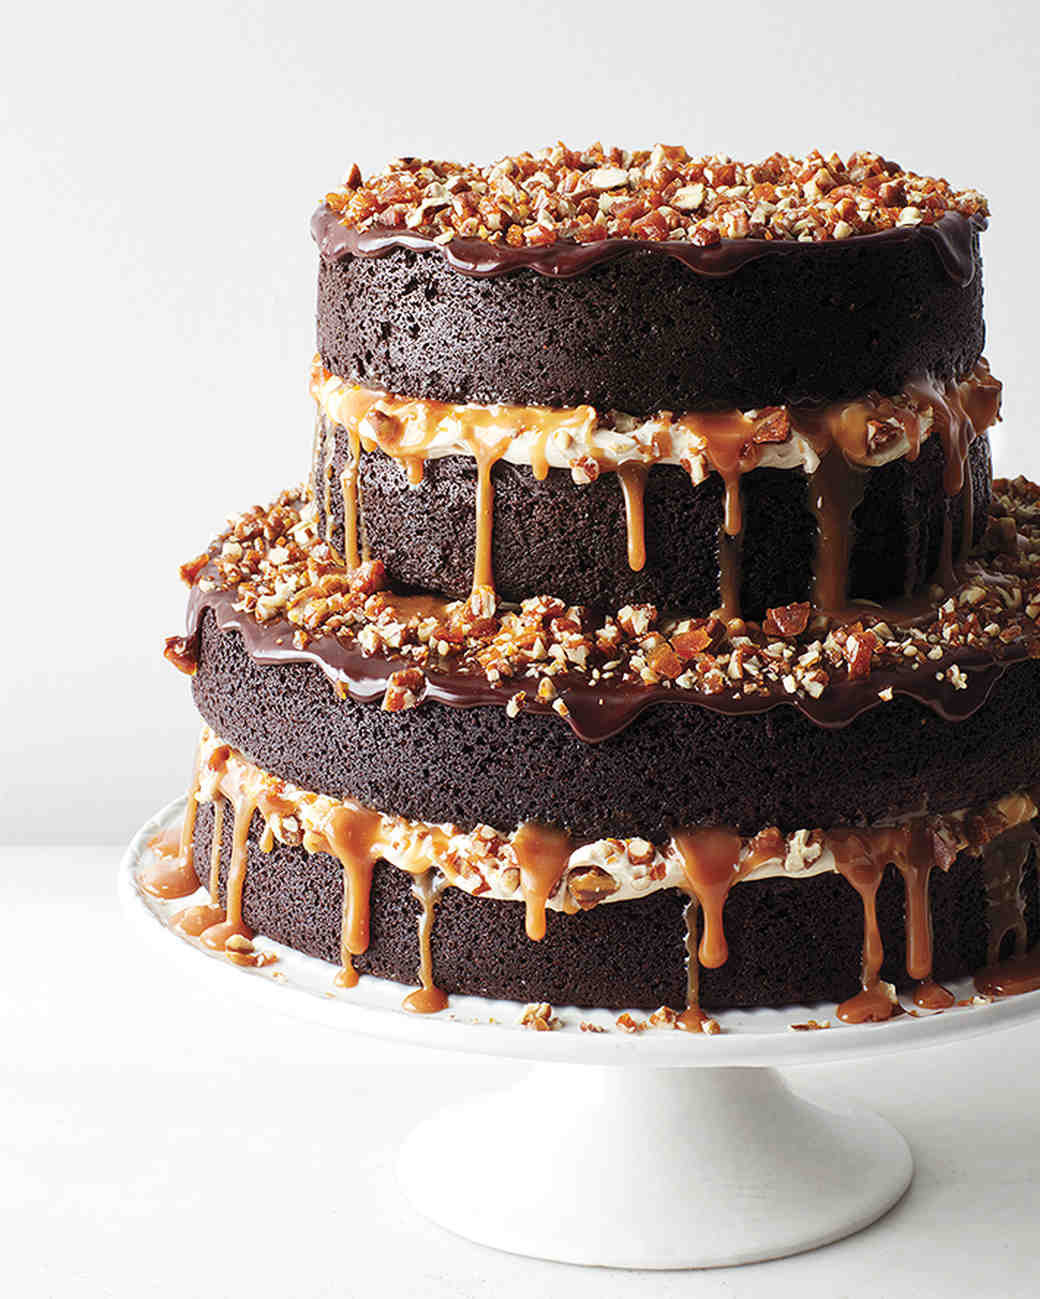 Chocolate Frosting Wedding Cakes
 29 Chocolate Wedding Cake Ideas That Will Blow Your Guests